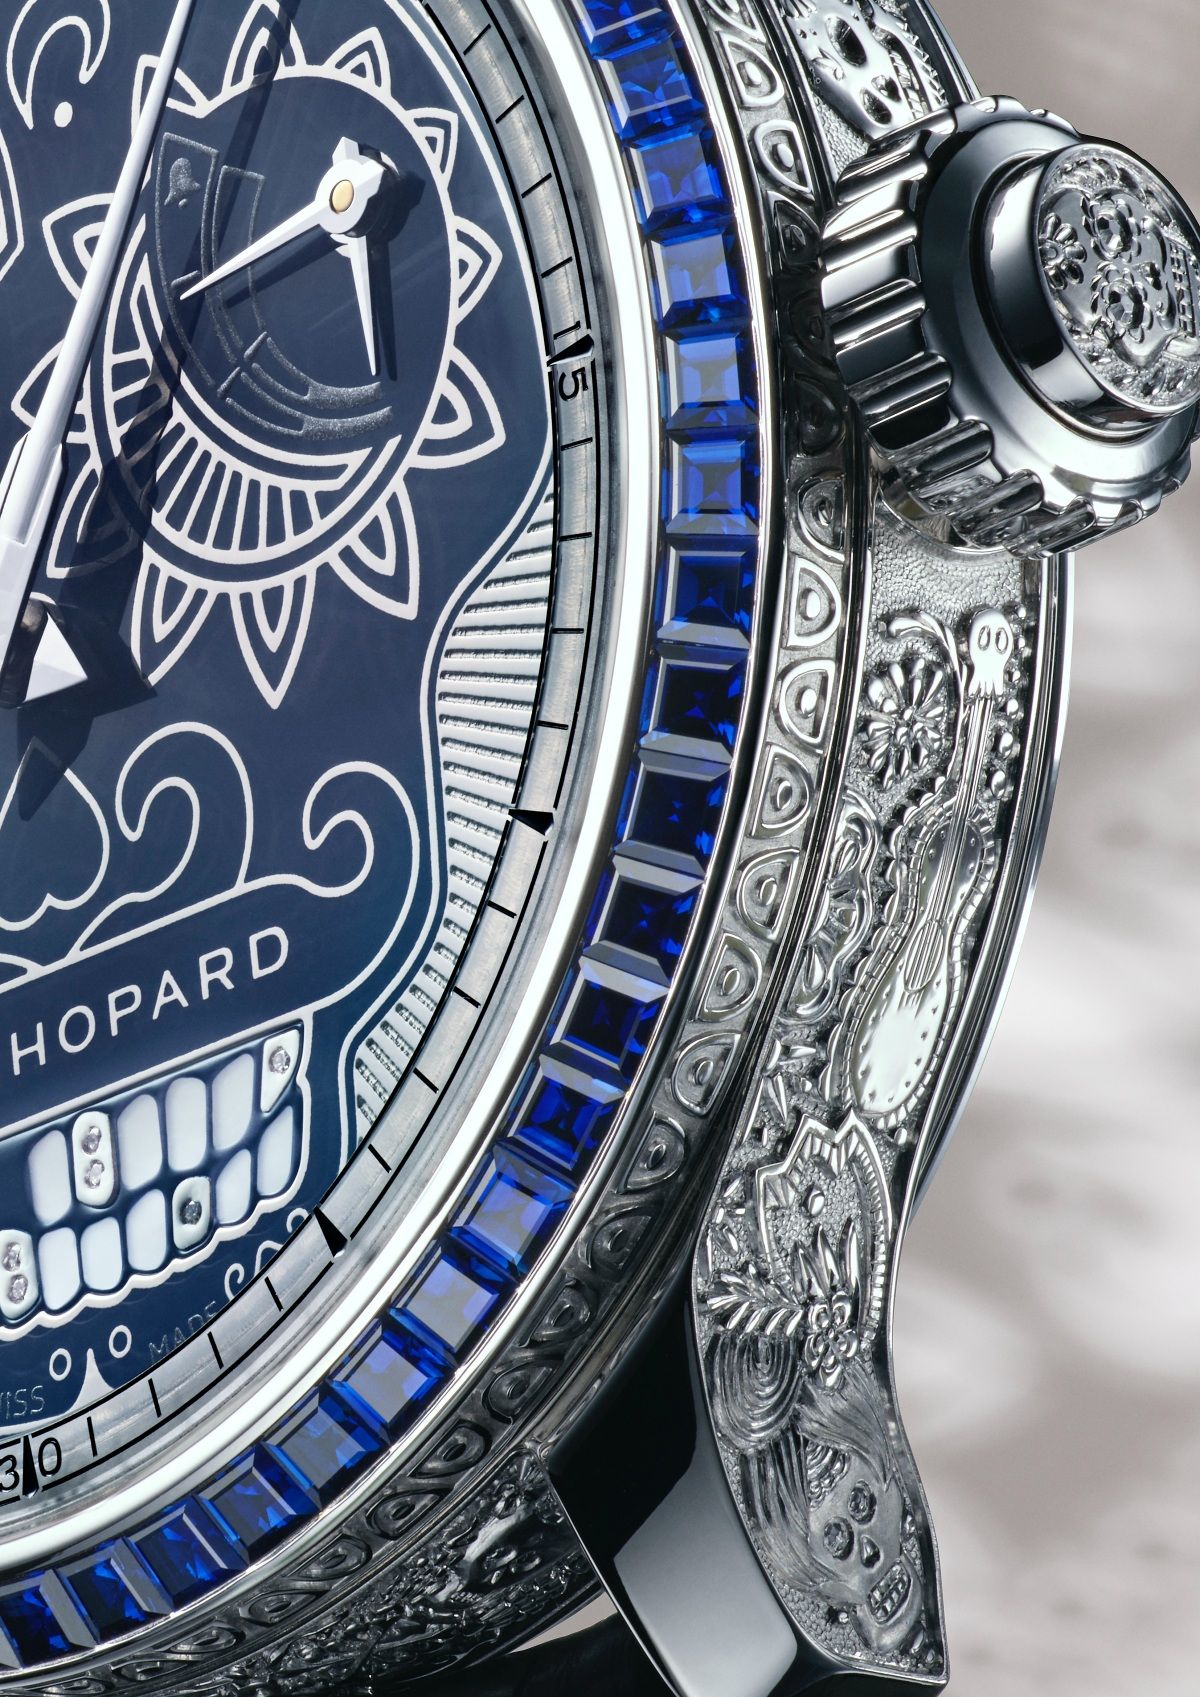 The entire case is hand-engraved and topped with a bezel in sapphires